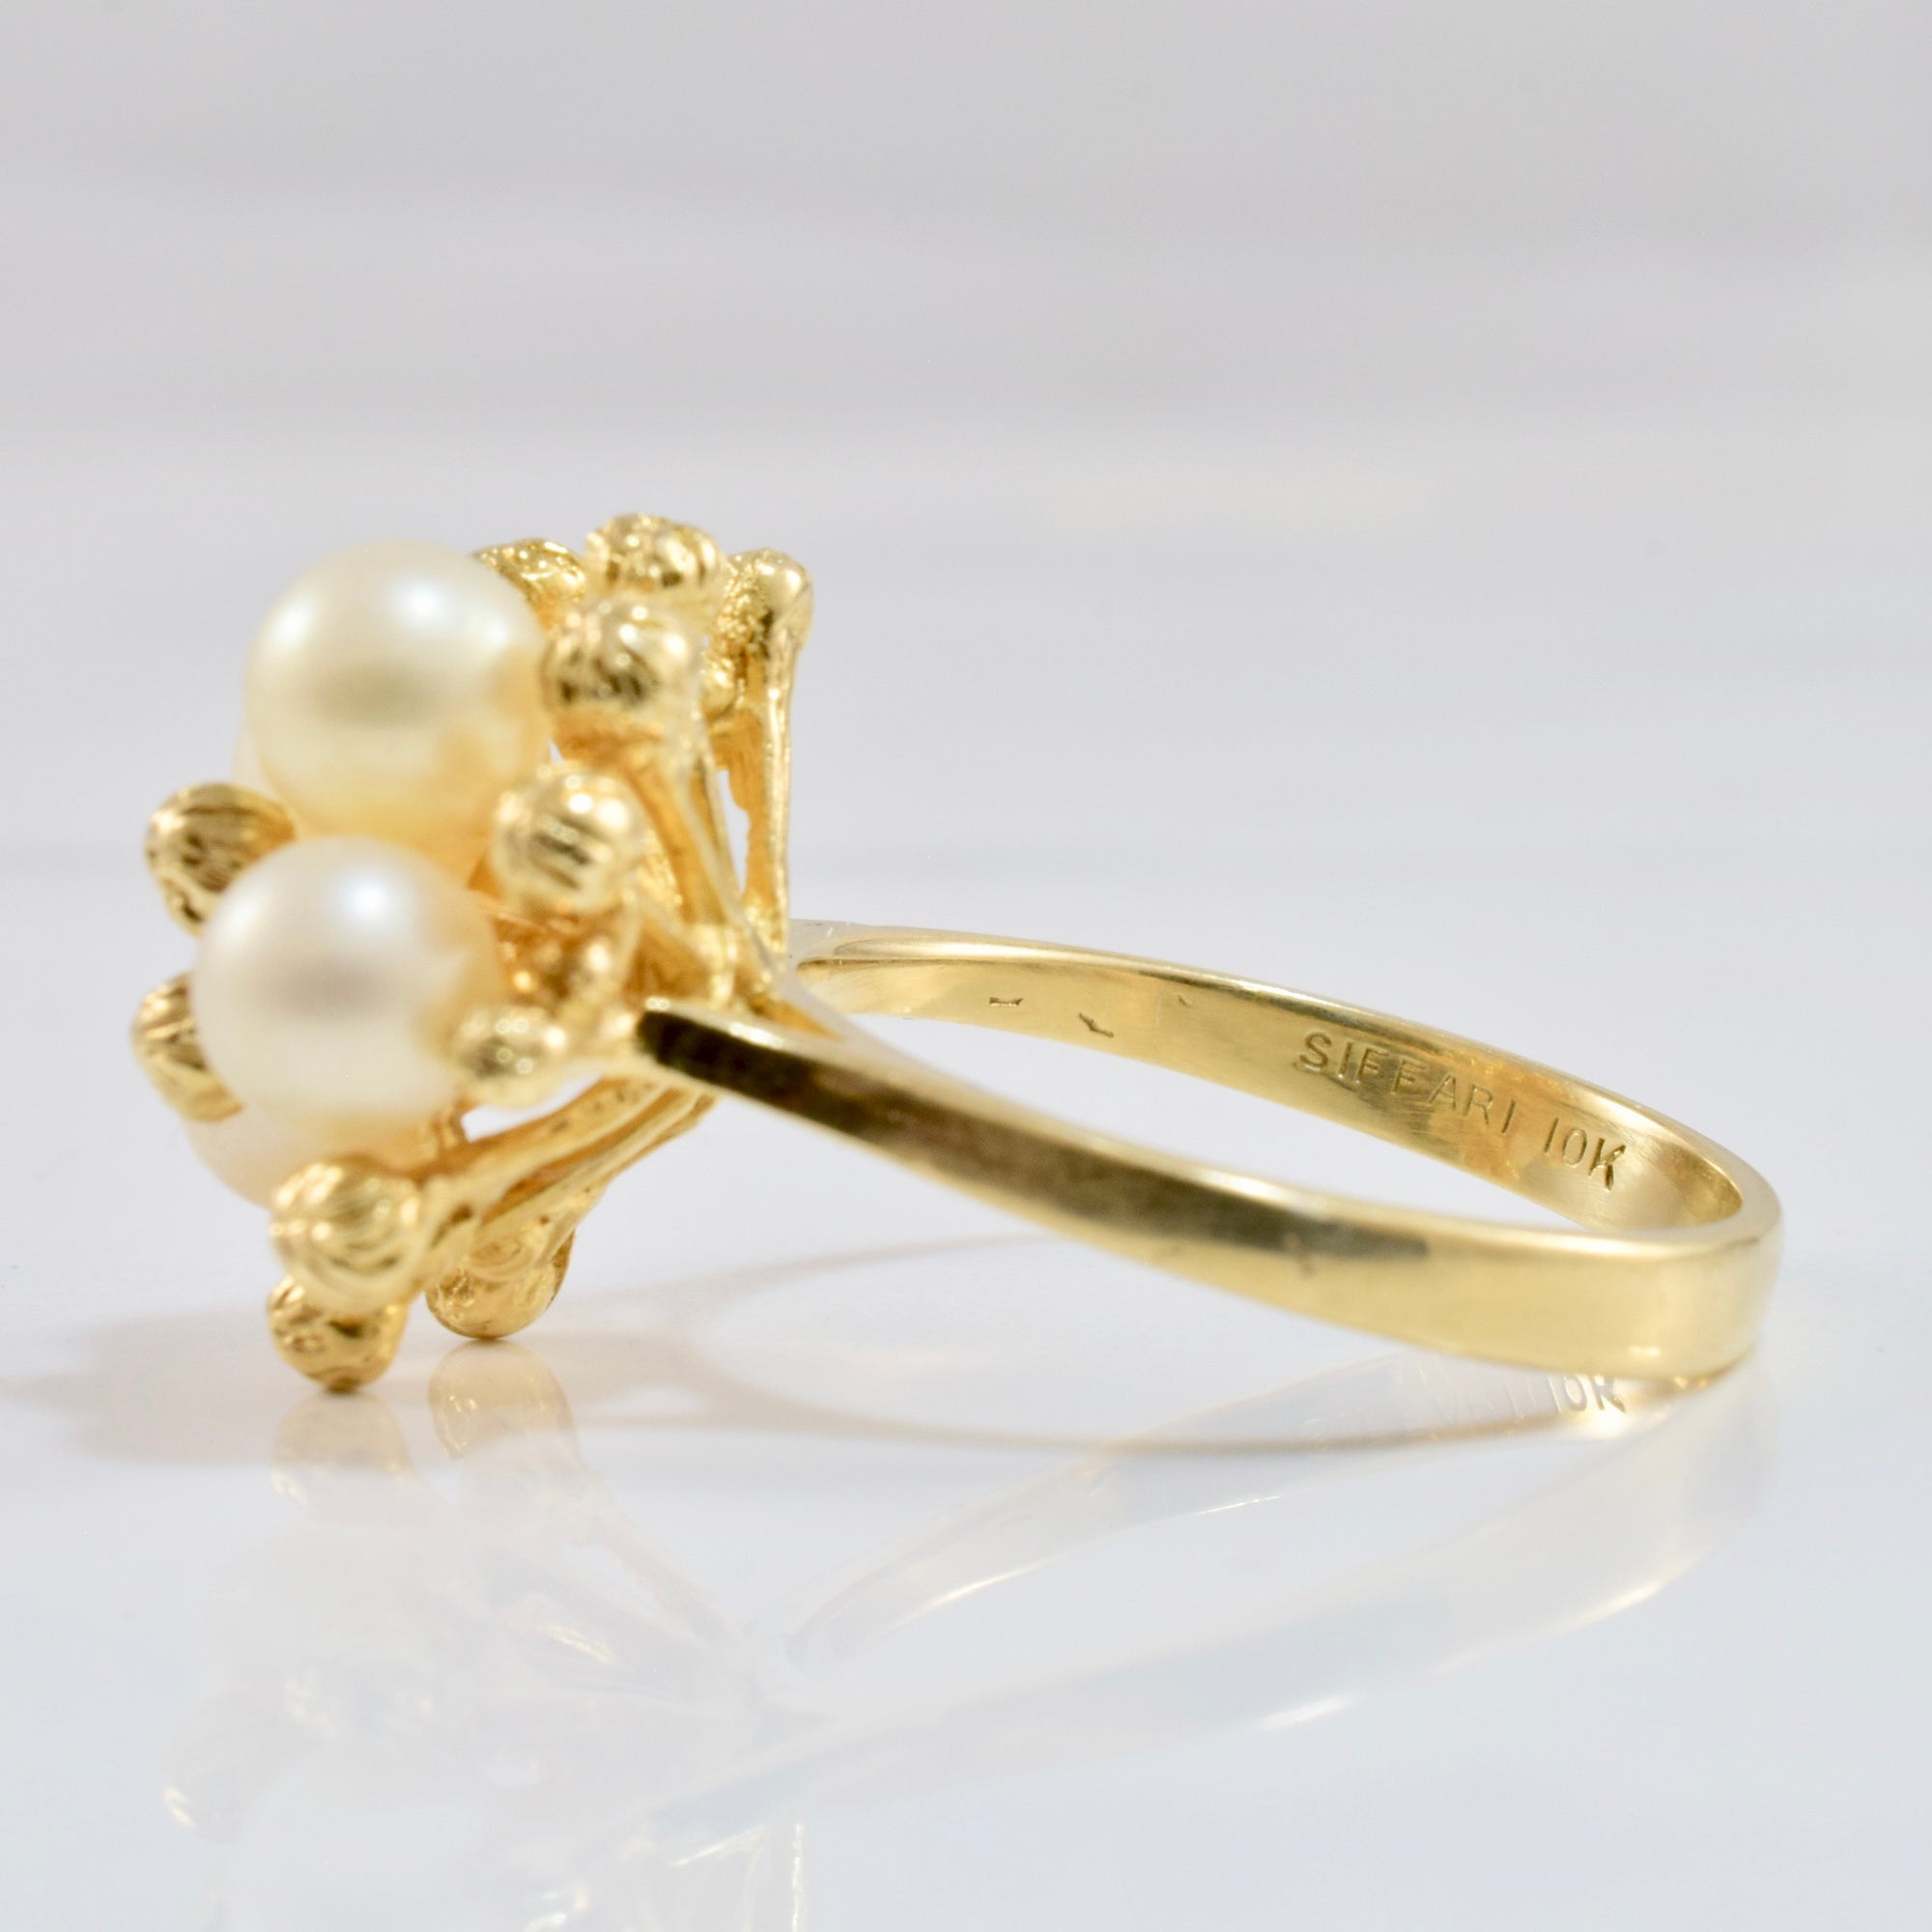 Pearl Cluster Ring | SZ 7 |